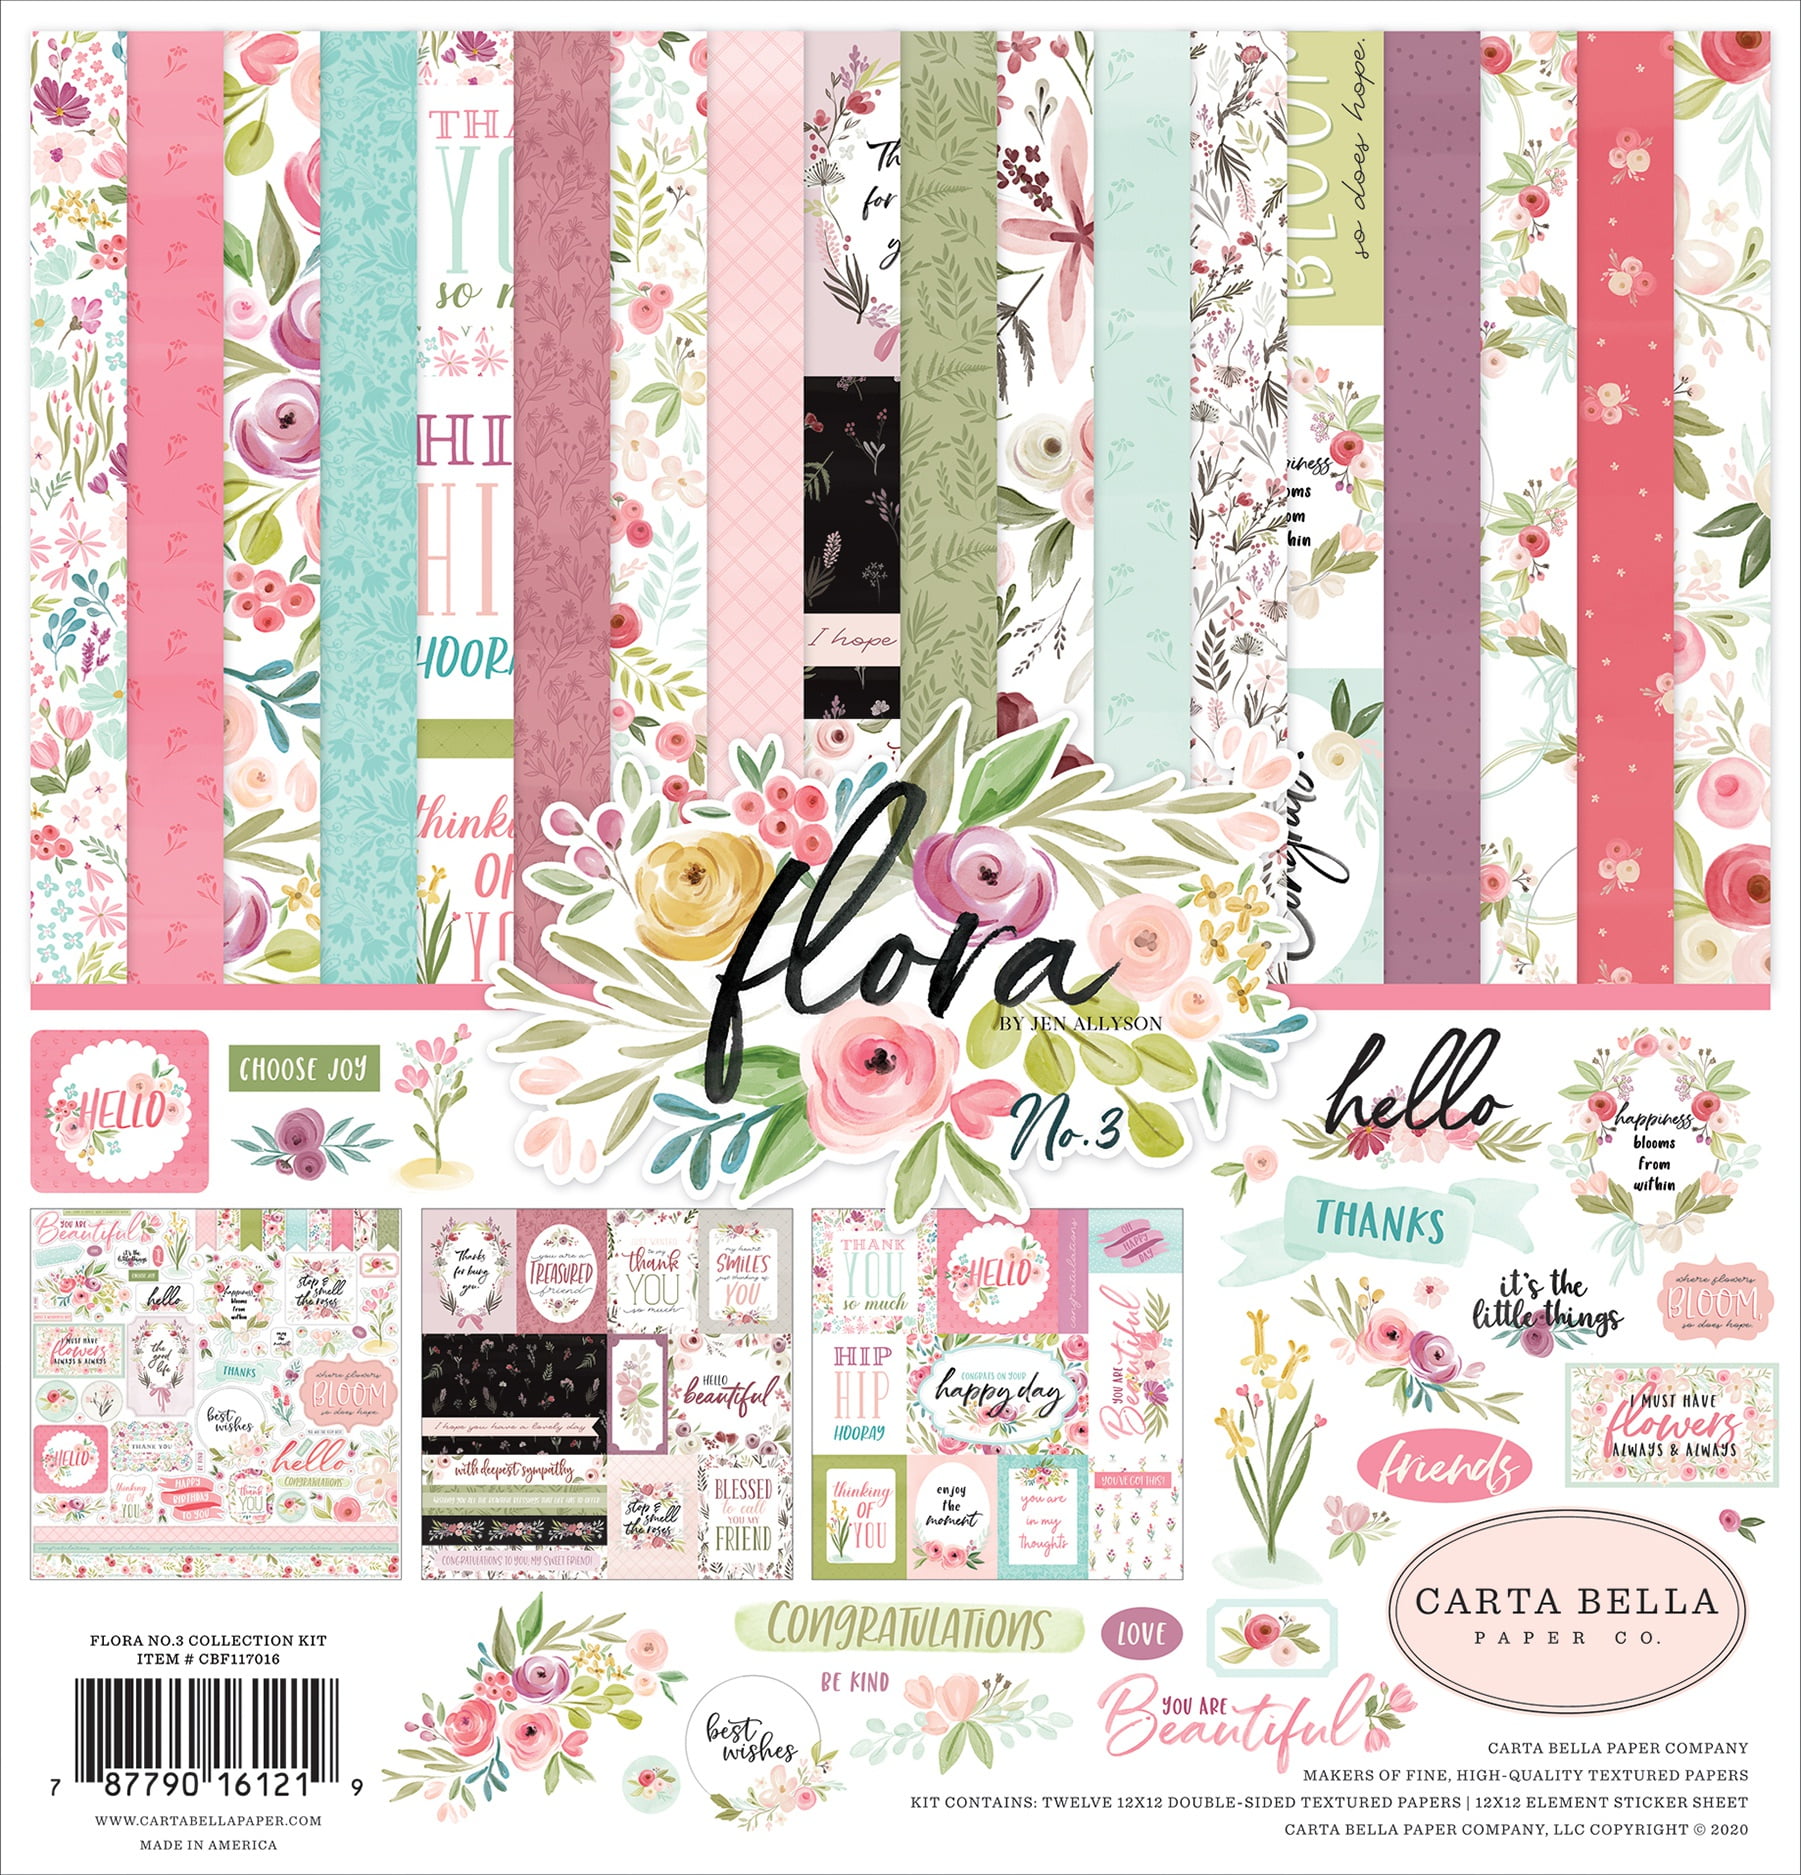 Carta Bella Happy Crafting Collection Kit